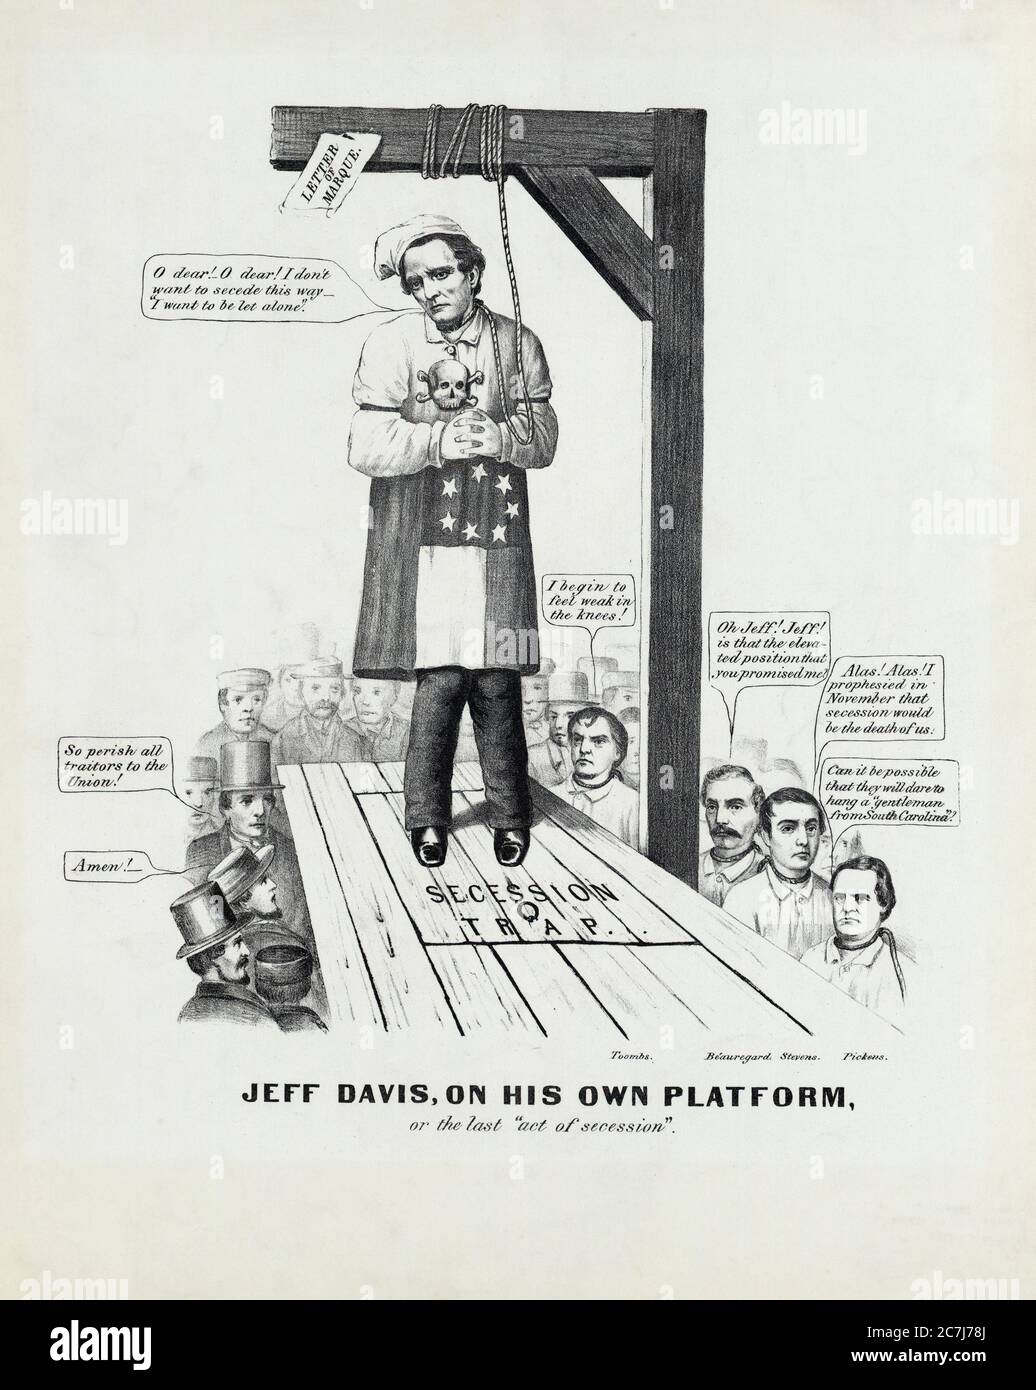 Jeff Davis on his own platform; or the last 'Act of Secession' Political Cartoon, Currier & Ives, 1861 Stock Photo